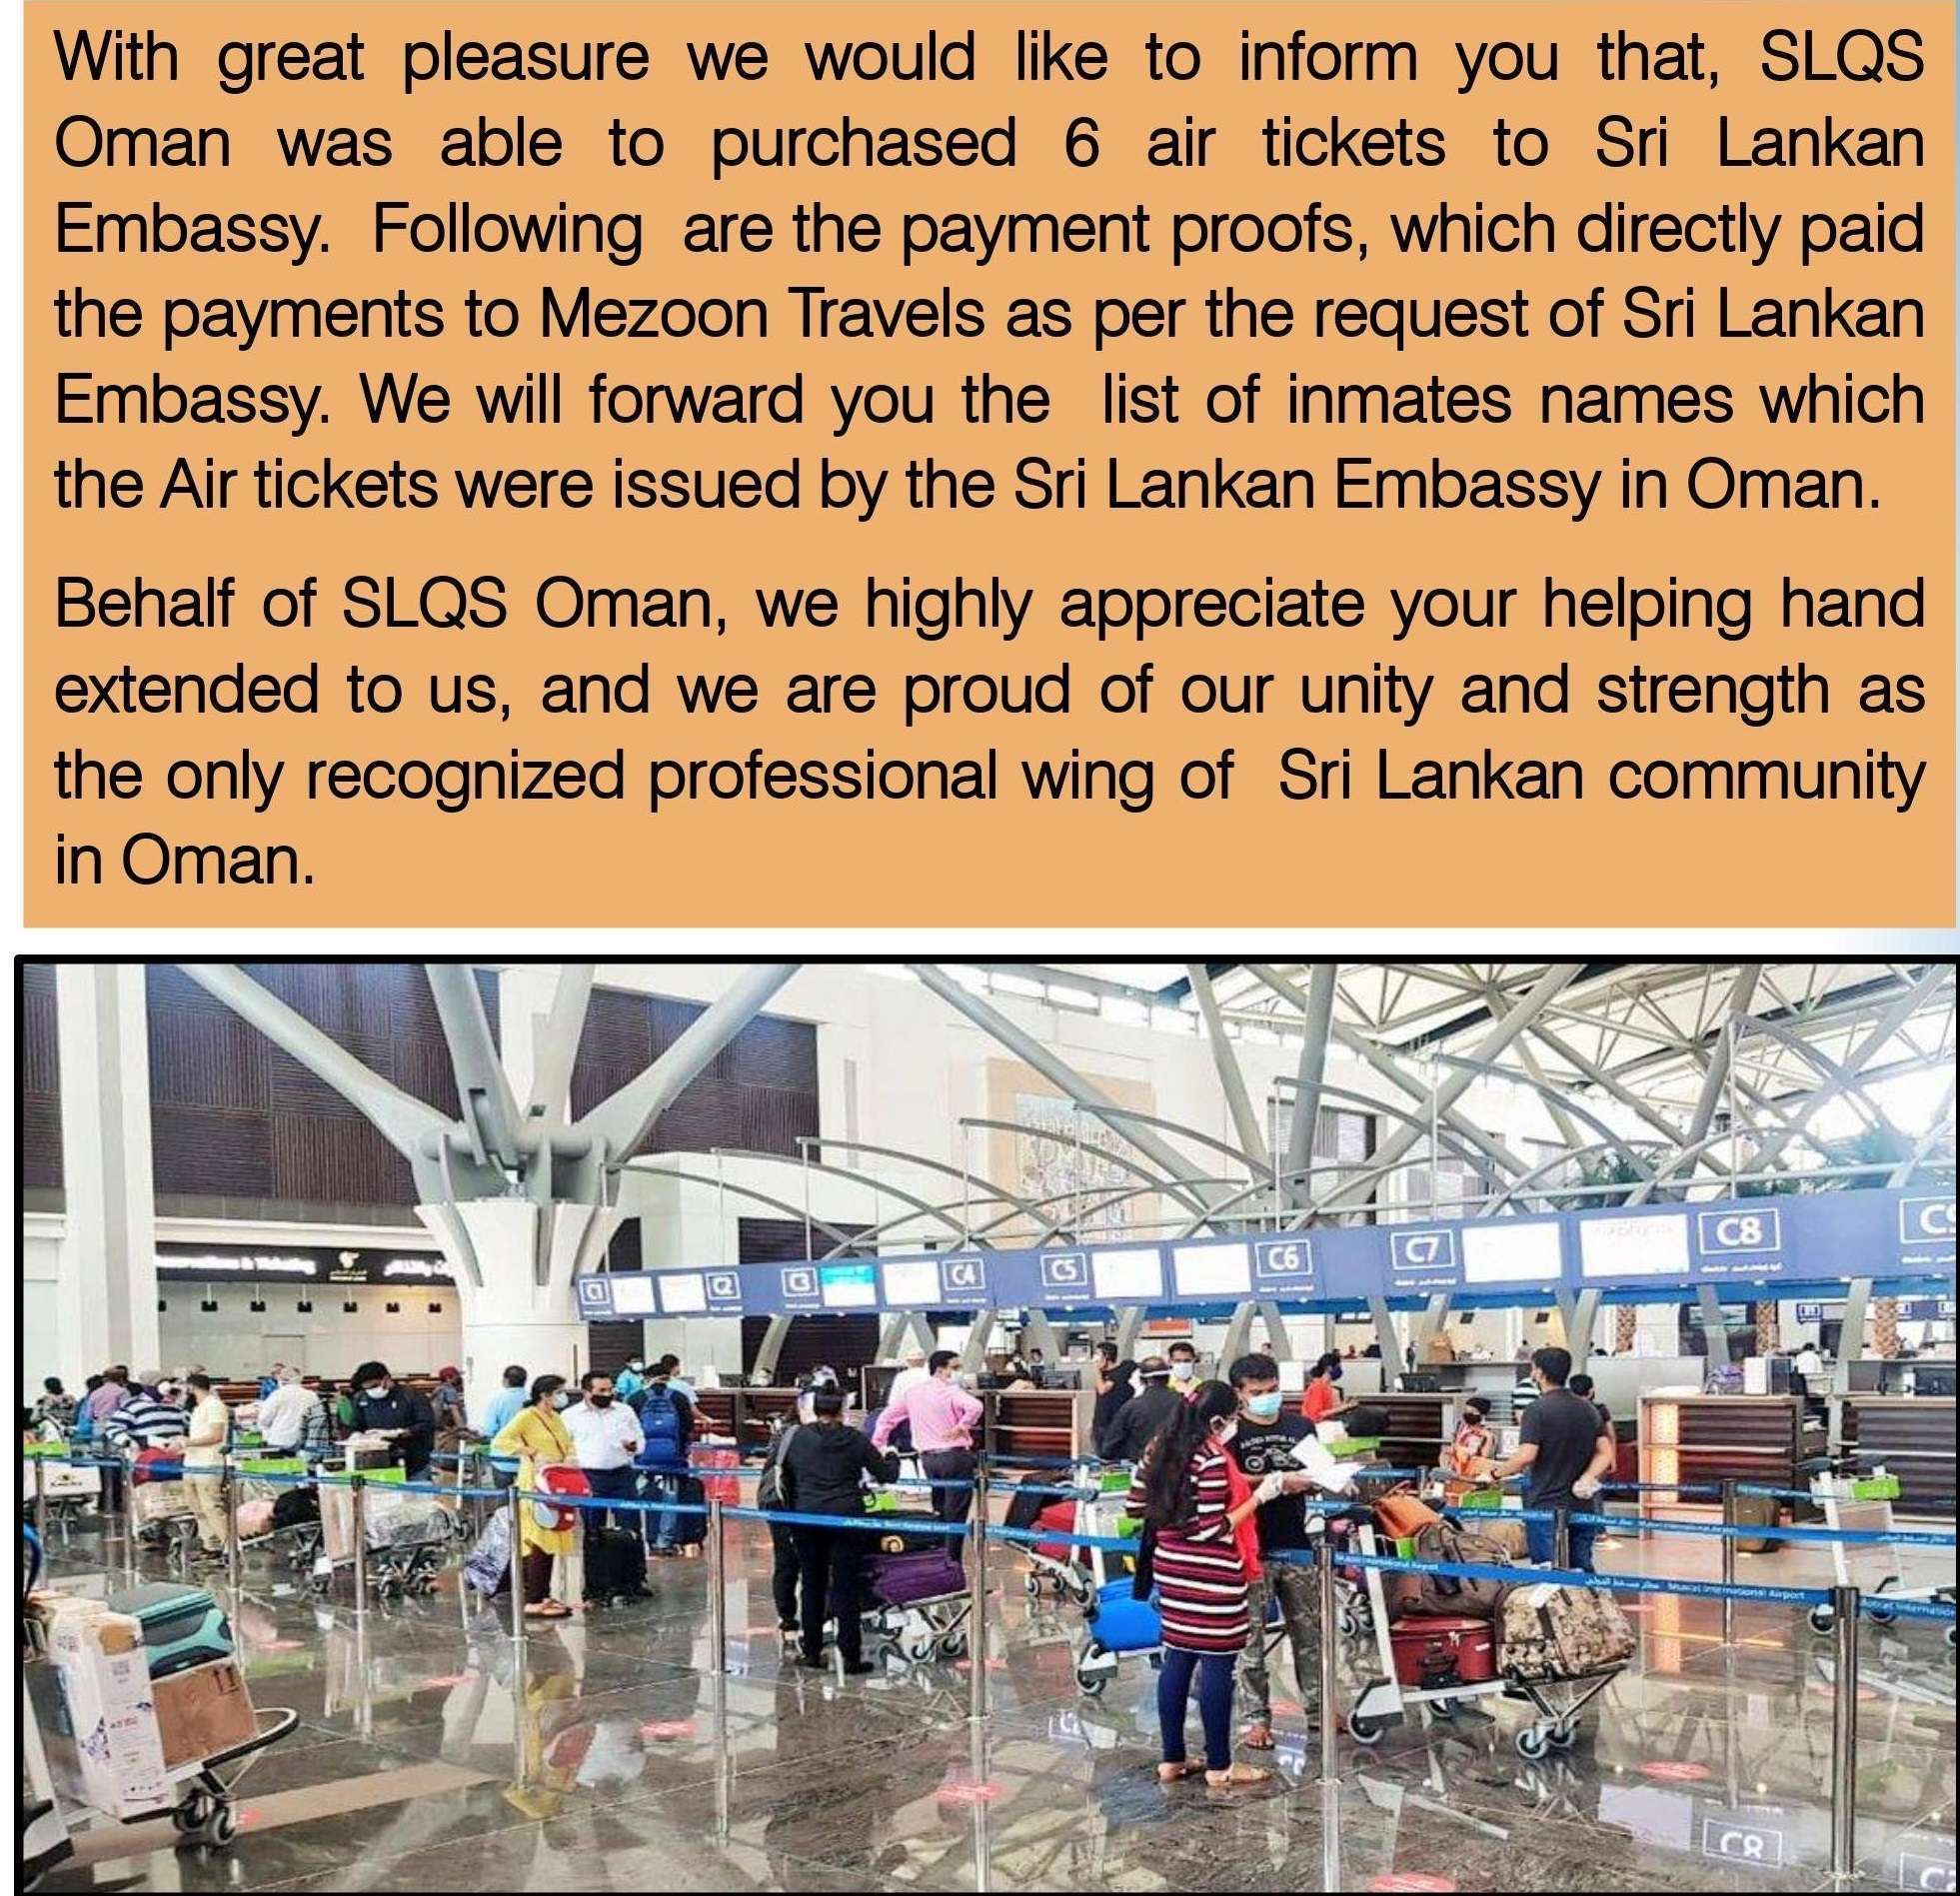 SLQS contributed for the purchasing of Air Tickets to Sri Lankan Nationals who were unable to bear the air ticket cost